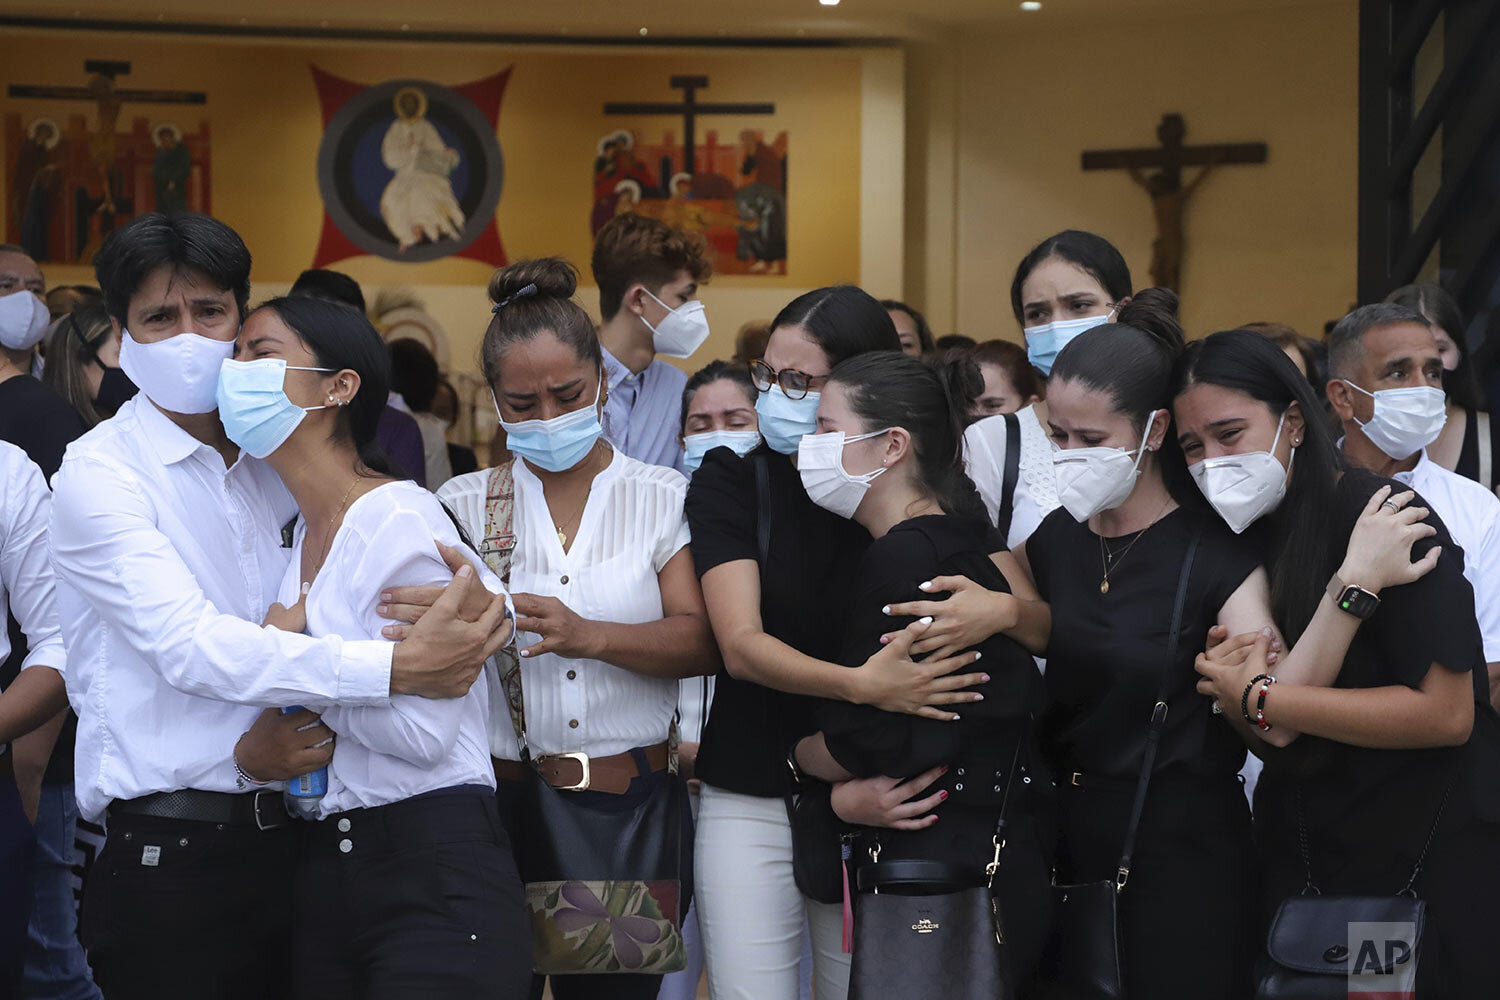  Relatives and friends of Sara Maria Garcia, one of five youths killed by unidentified gunmen two days prior, mourn during her funeral in Buga, Colombia, Jan. 25, 2021. (AP Photo/Juan B. Diaz) 